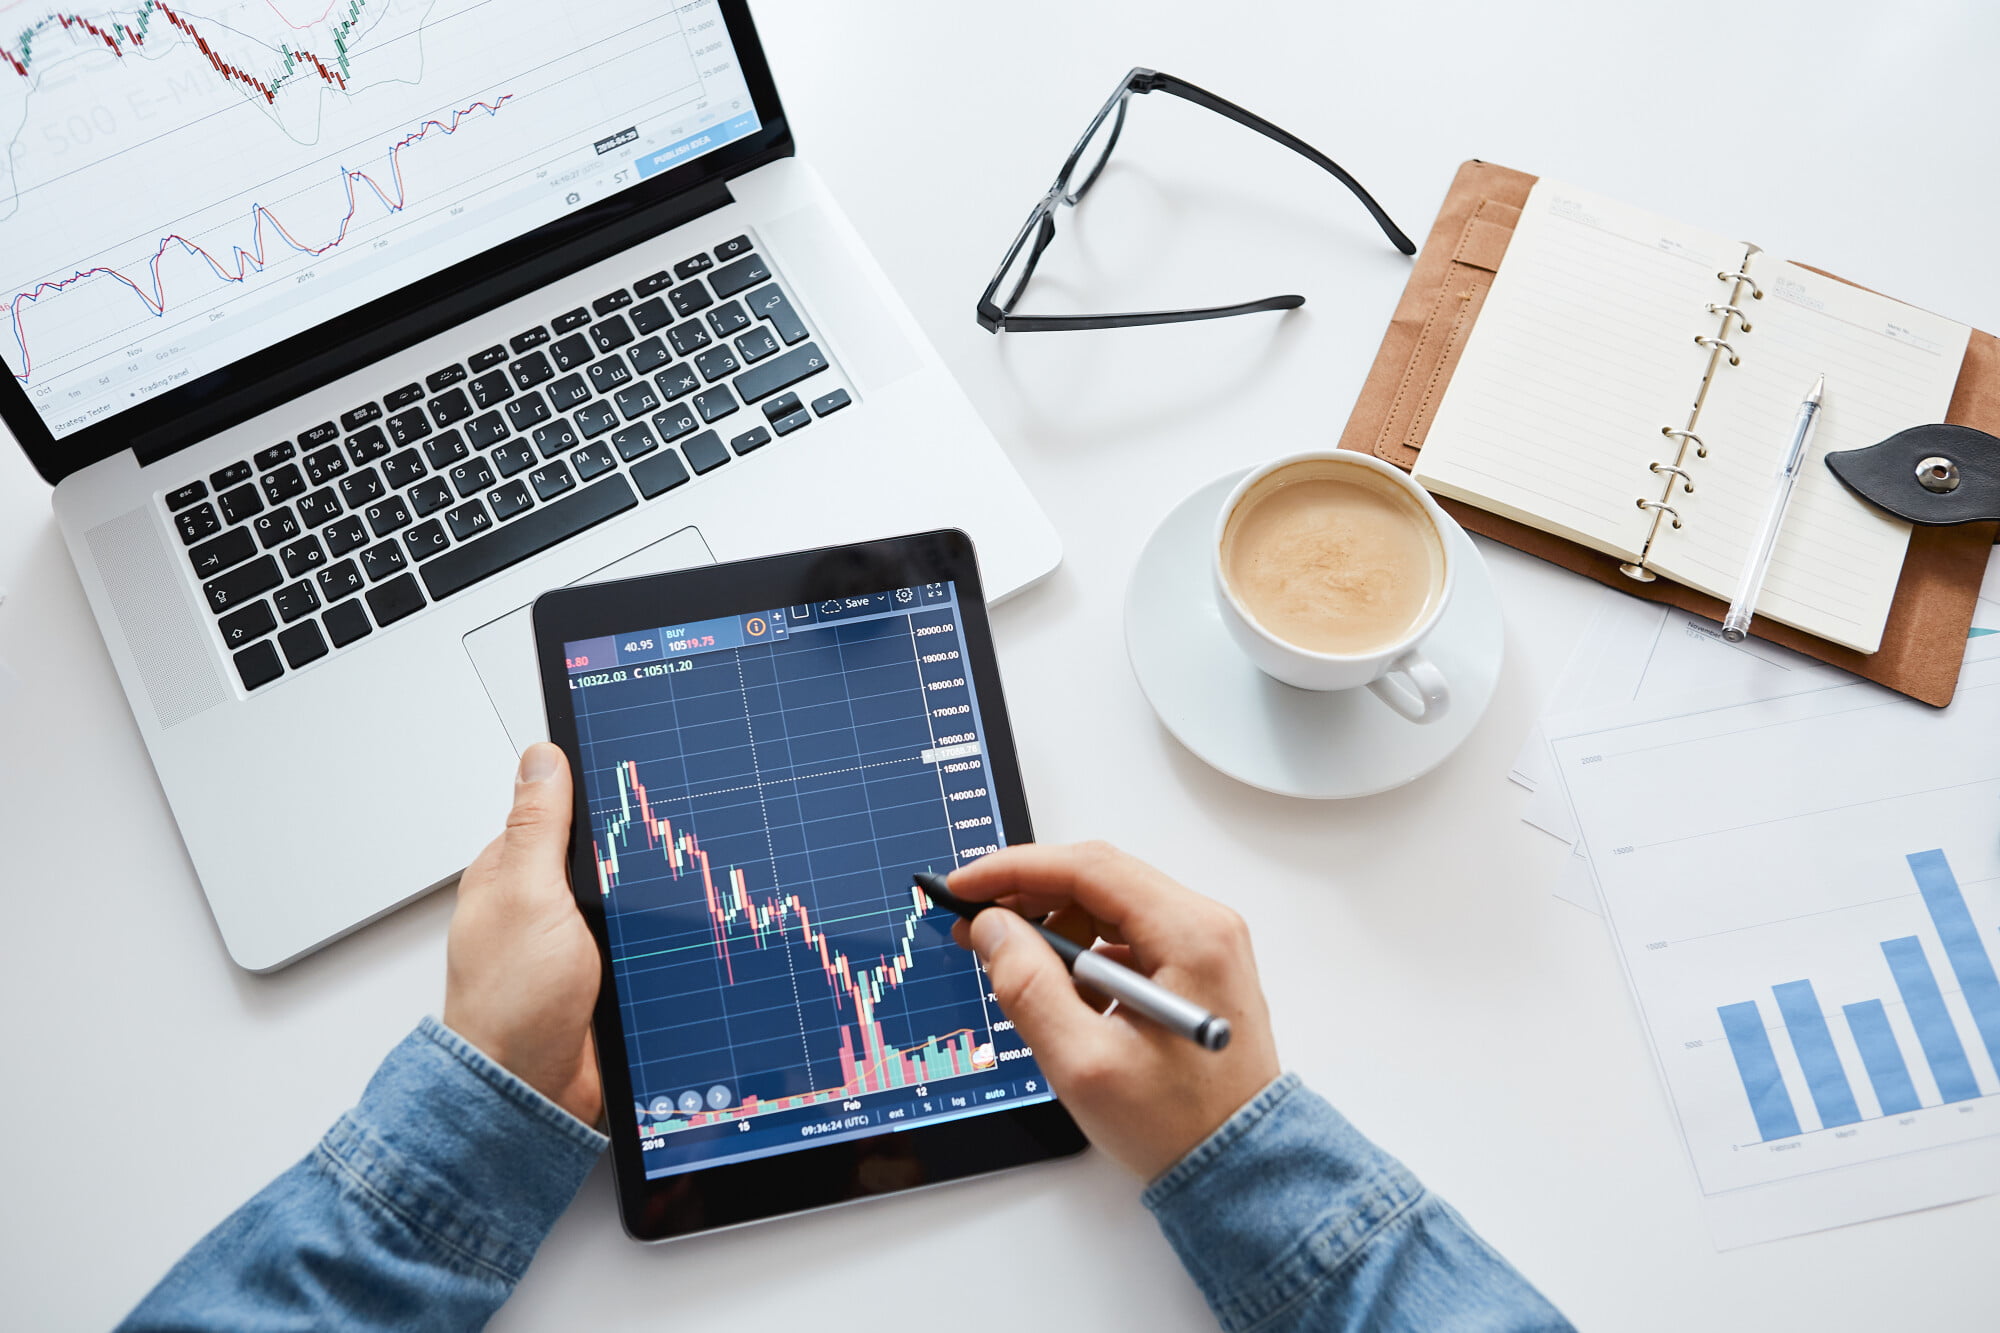 Are you looking to earn some extra money with day trading? Here's how to create a successful trade strategy that can't be beat.